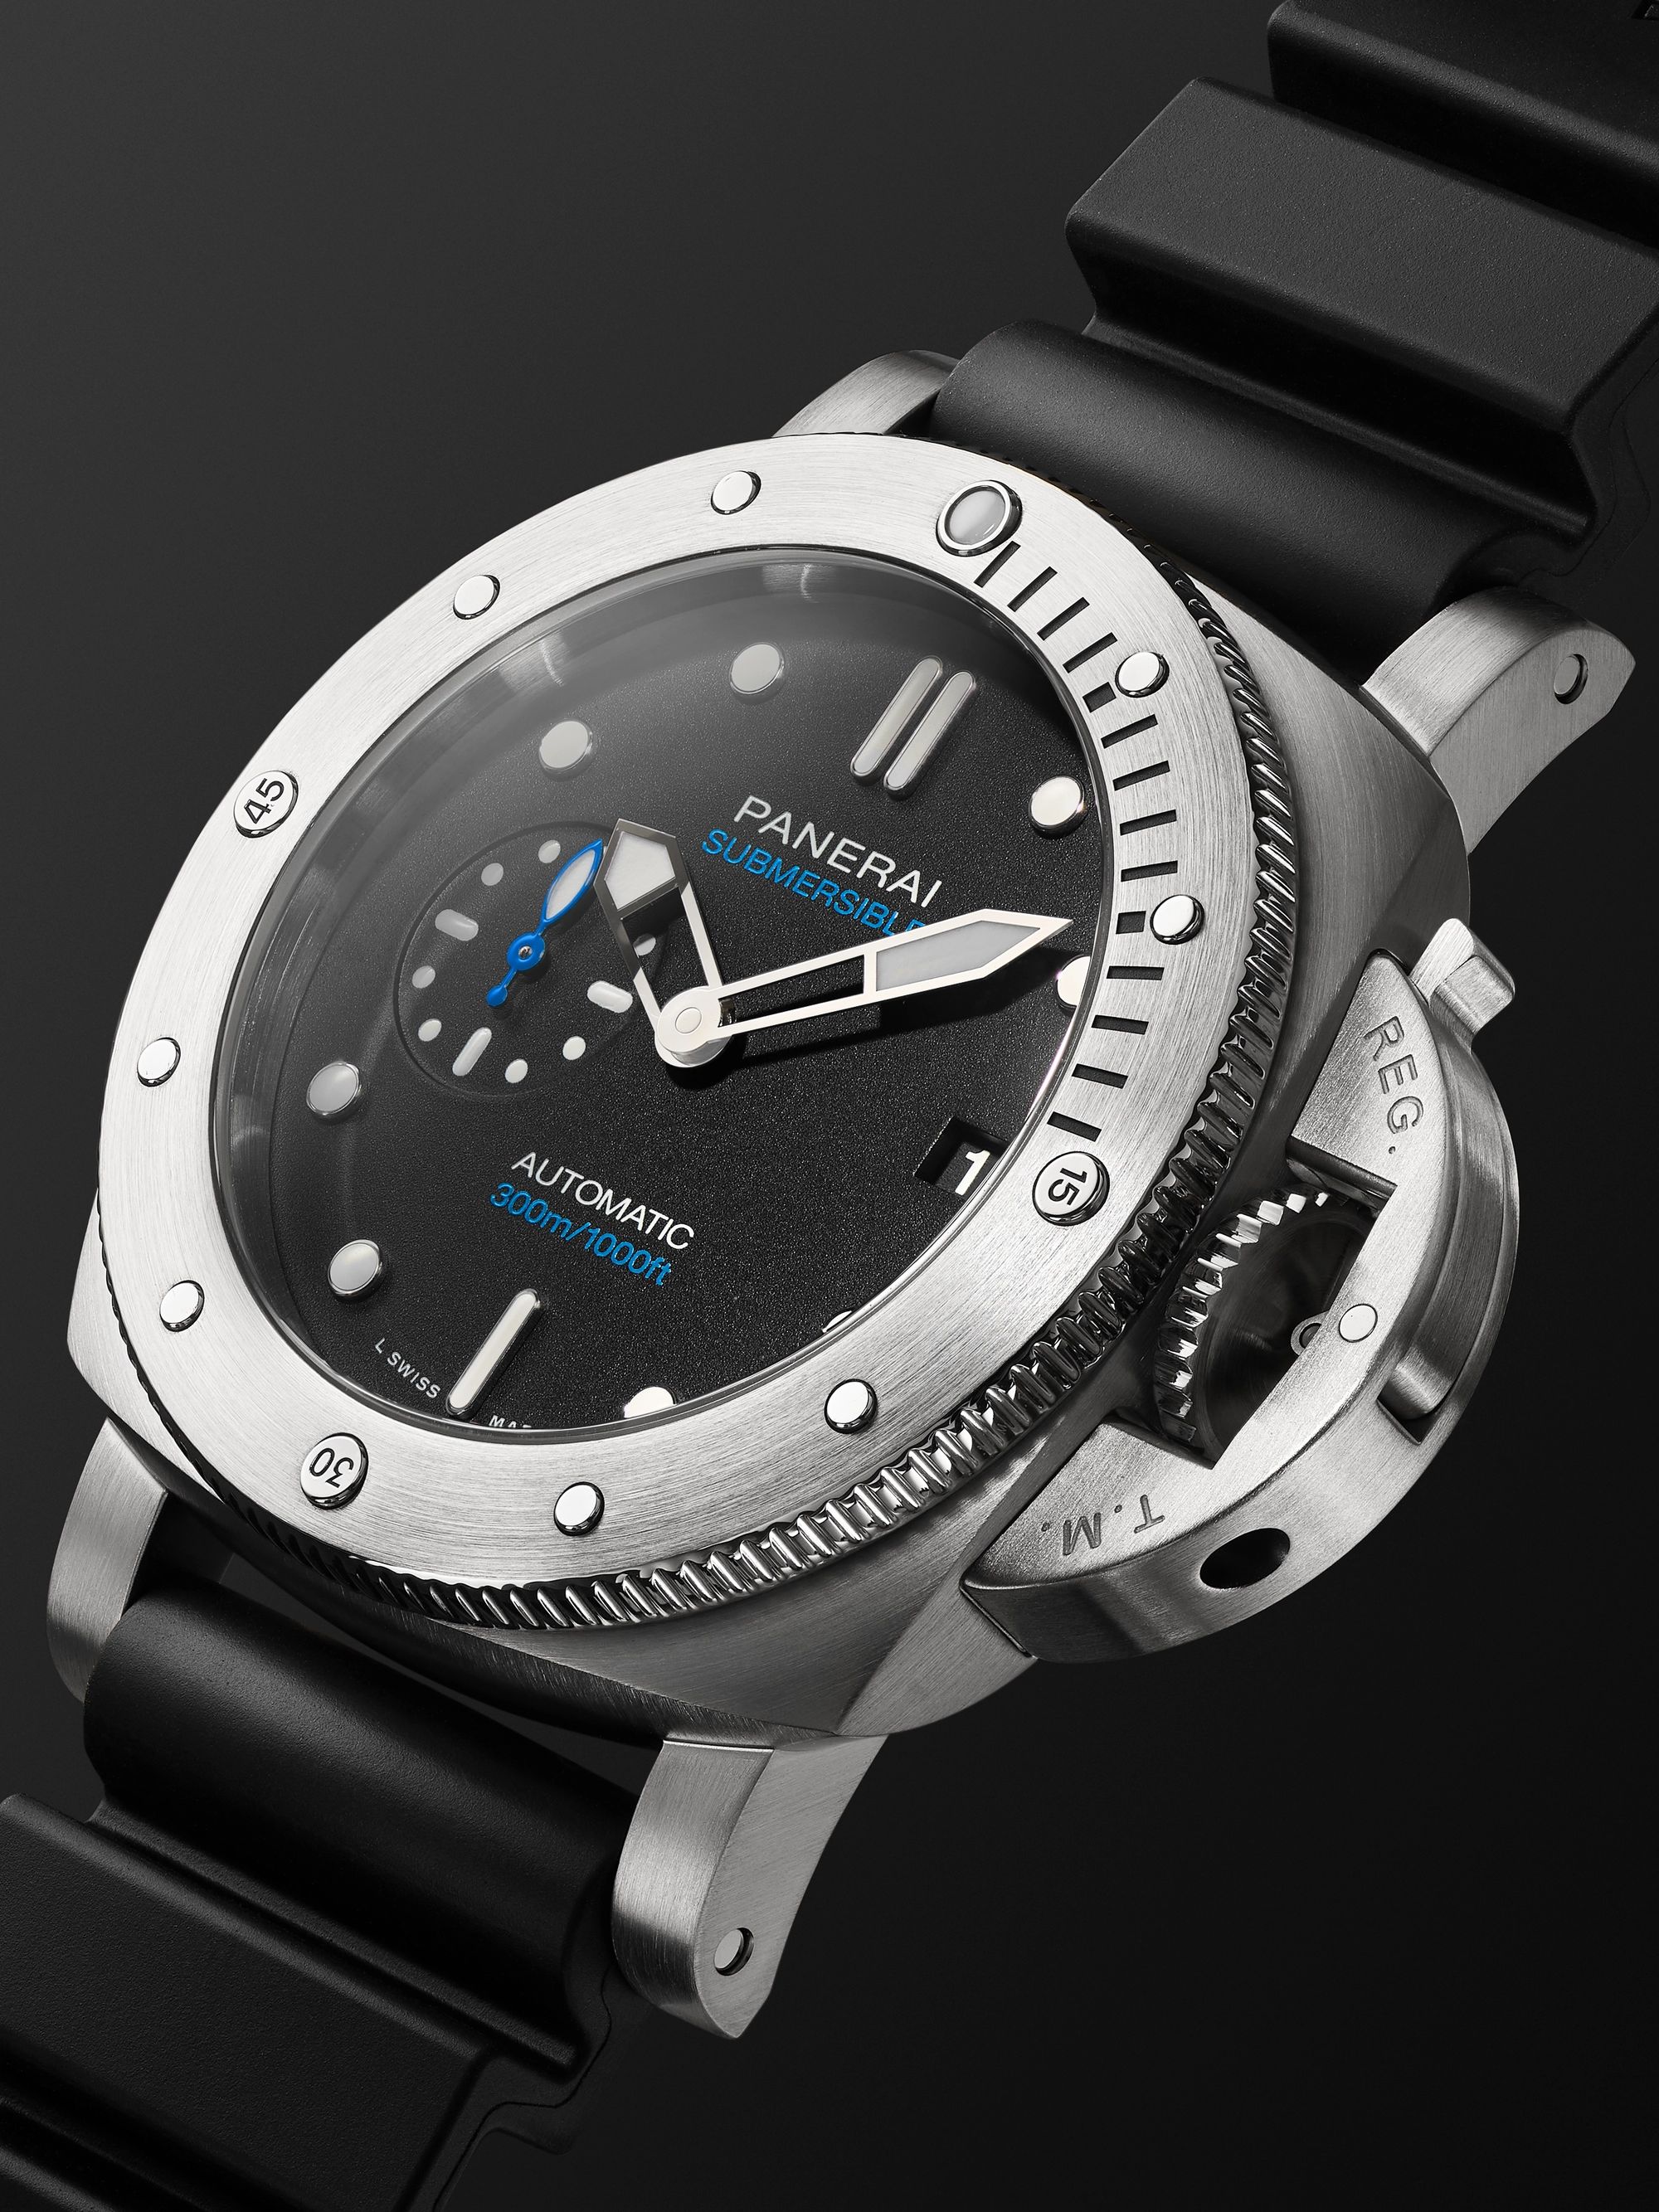 PANERAI Submersible Automatic 42mm Stainless Steel and Rubber Watch, Ref. No. PAM00973